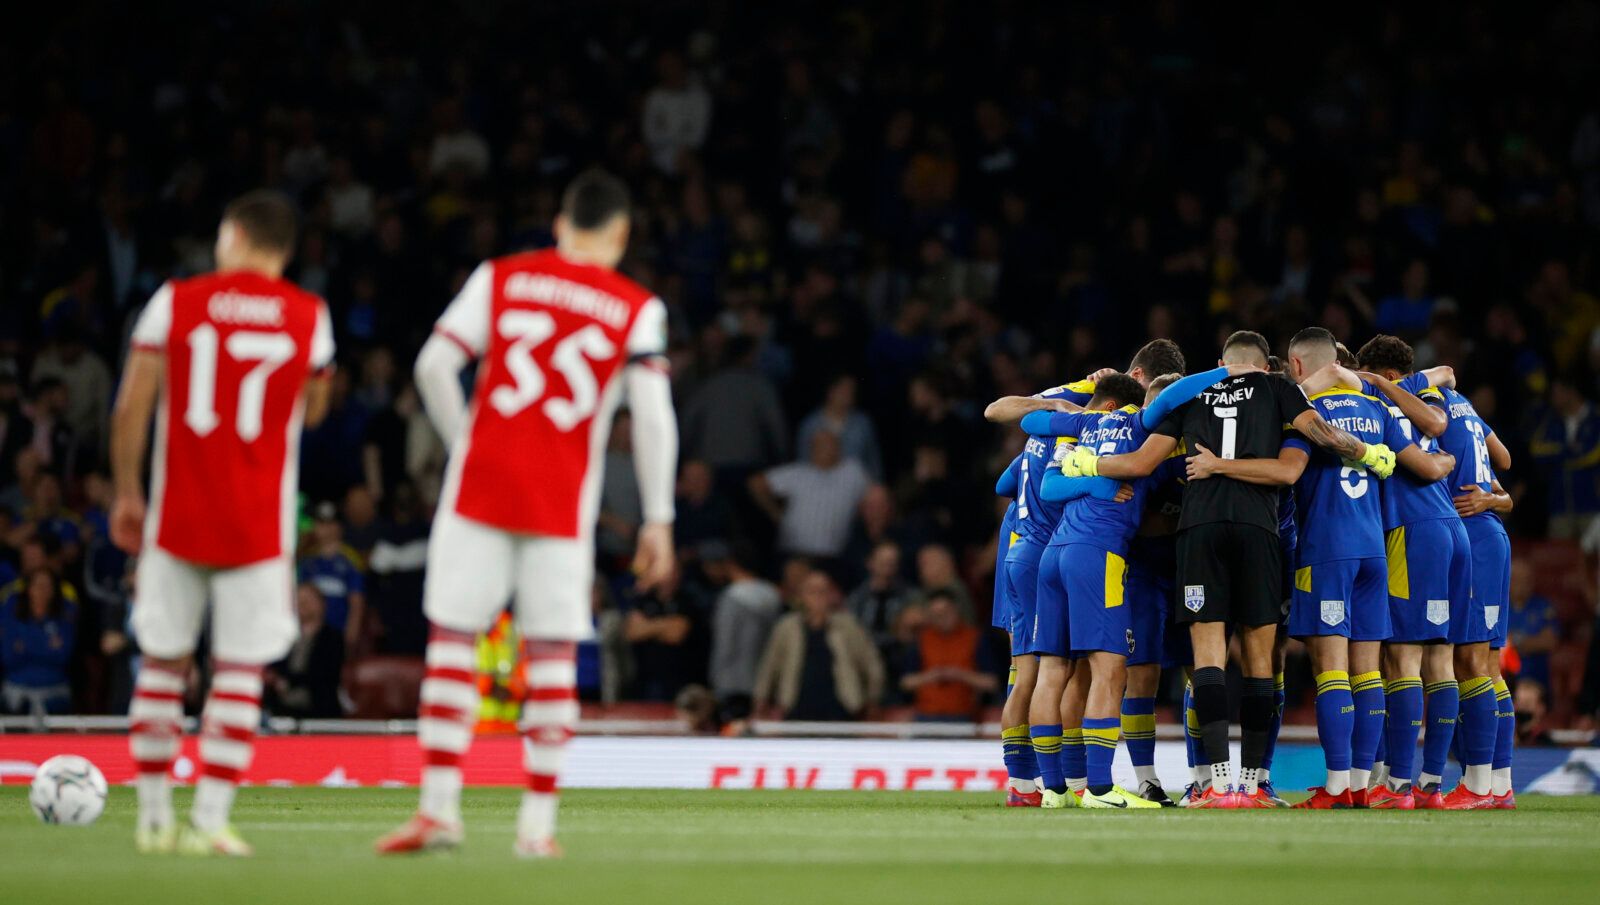 Soccer Football - Carabao Cup - Third Round - Arsenal v AFC Wimbledon - Emirates Stadium, London, Britain - September 22, 2021 AFC Wimbledon team huddle before the match Action Images via Reuters/John Sibley EDITORIAL USE ONLY. No use with unauthorized audio, video, data, fixture lists, club/league logos or 'live' services. Online in-match use limited to 75 images, no video emulation. No use in betting, games or single club /league/player publications.  Please contact your account representative